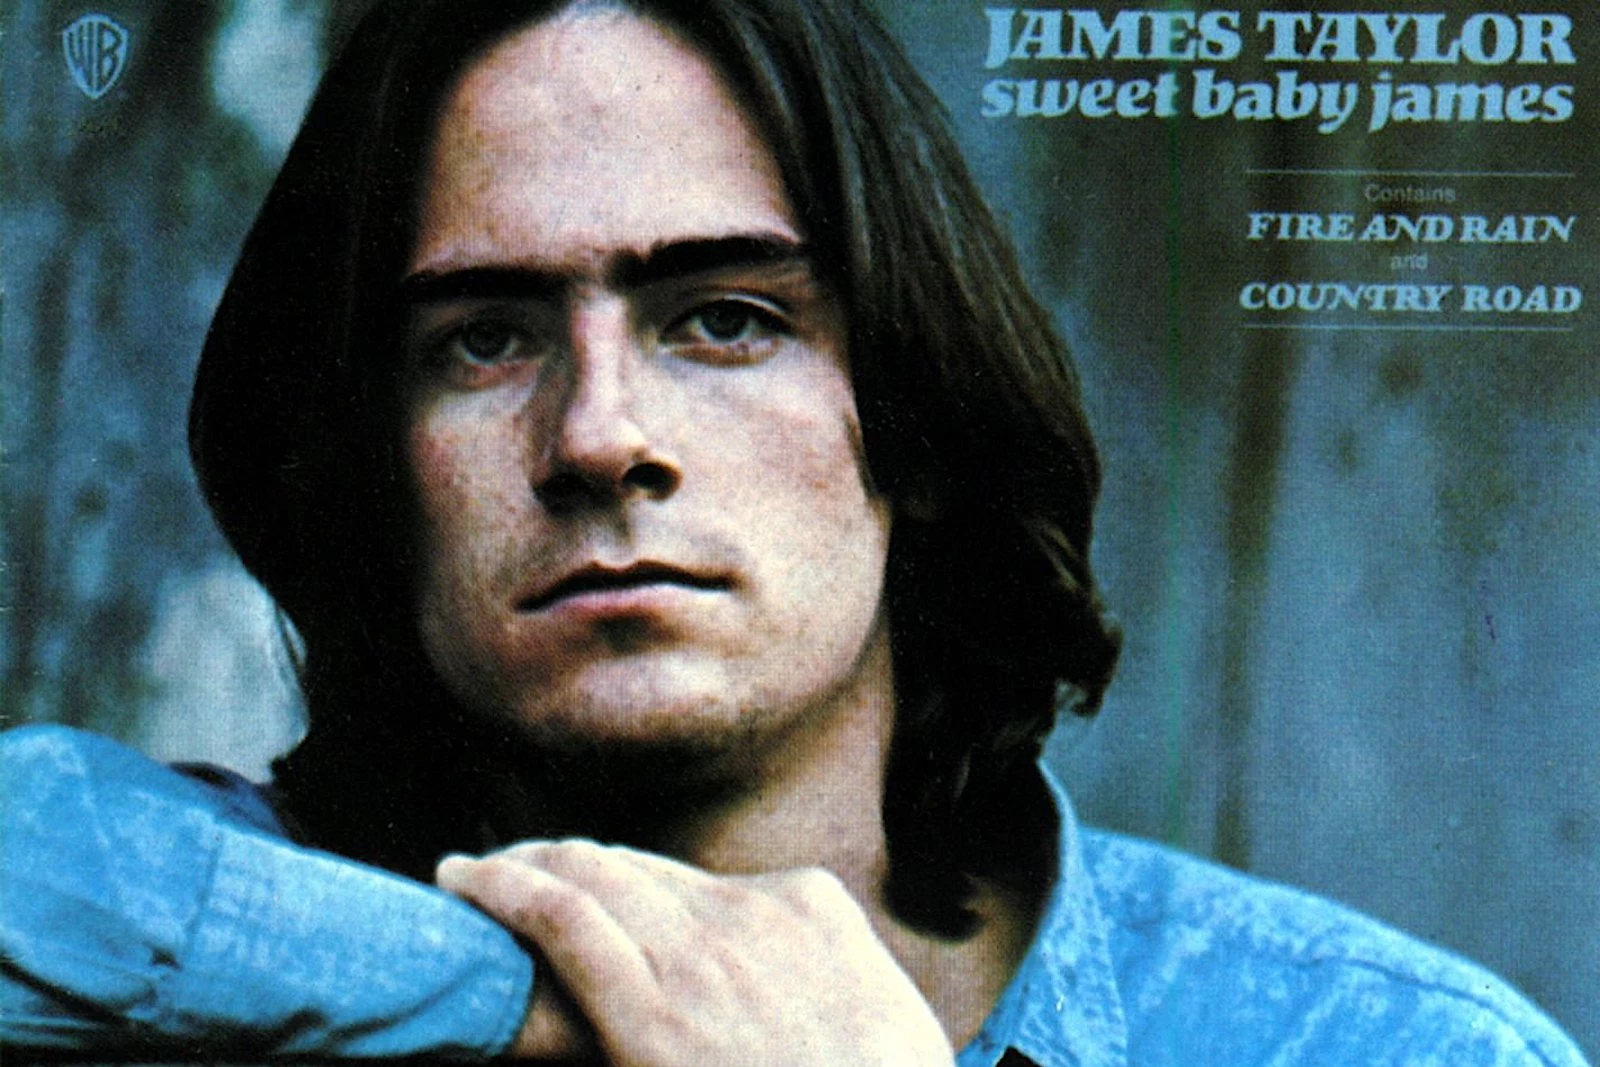 Brenda james ritchie friends hot mom 50 Years Ago James Taylor S Sweet Baby James Sparks New Genre